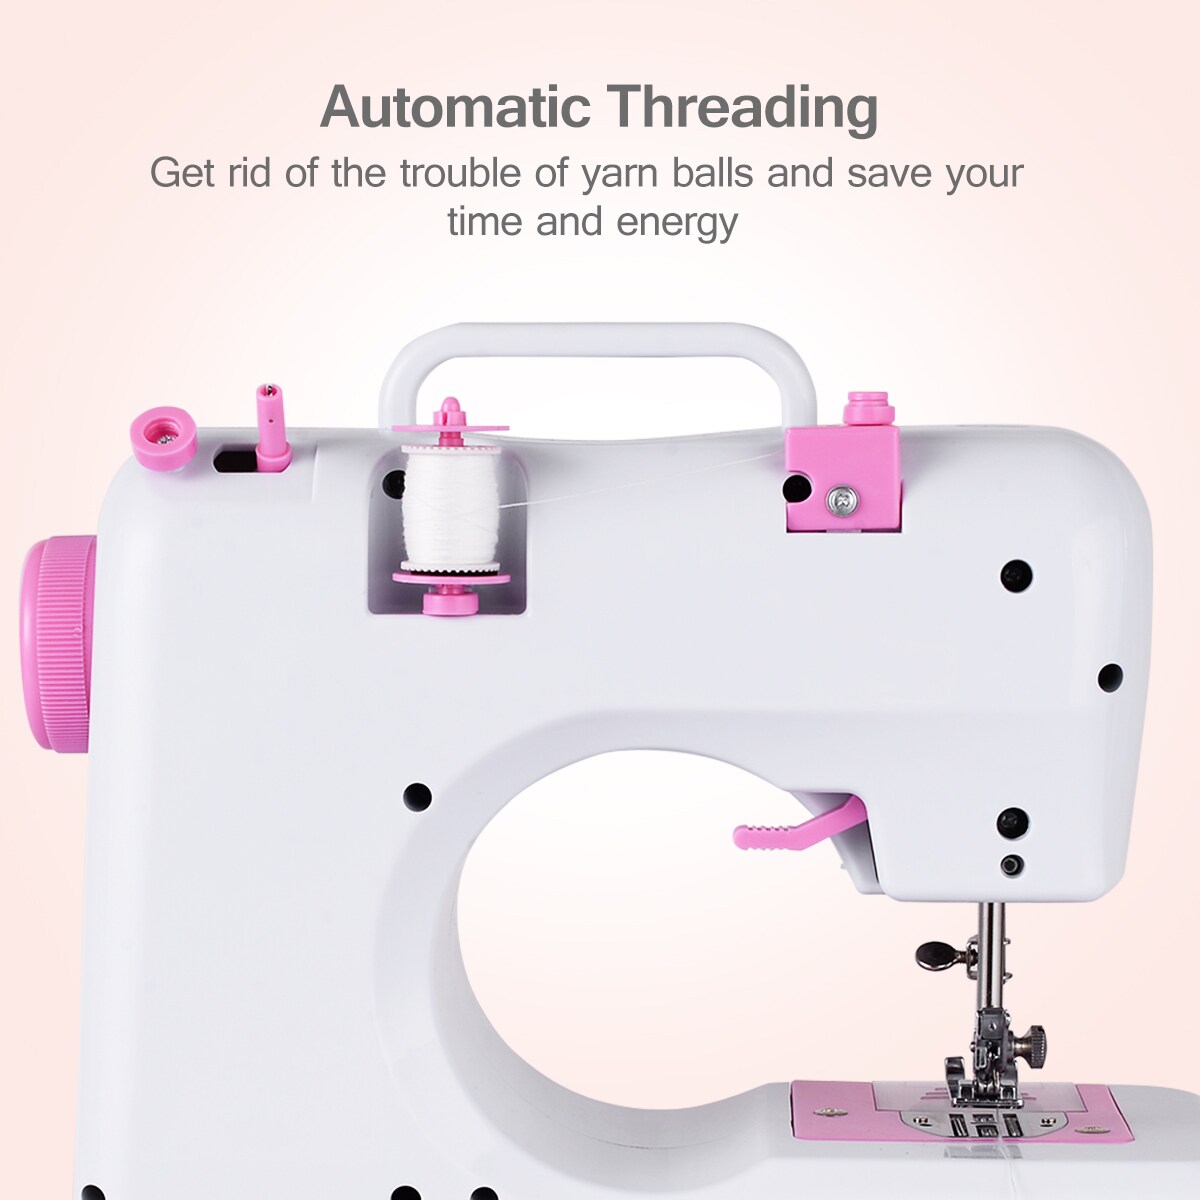 COSTWAY Electric Multifunctional Sewing Machine, 12 Stitches Portable  Sewing Machine with Light Free Arm Battery, DC Adapter, Adjustable Sewing  Speed